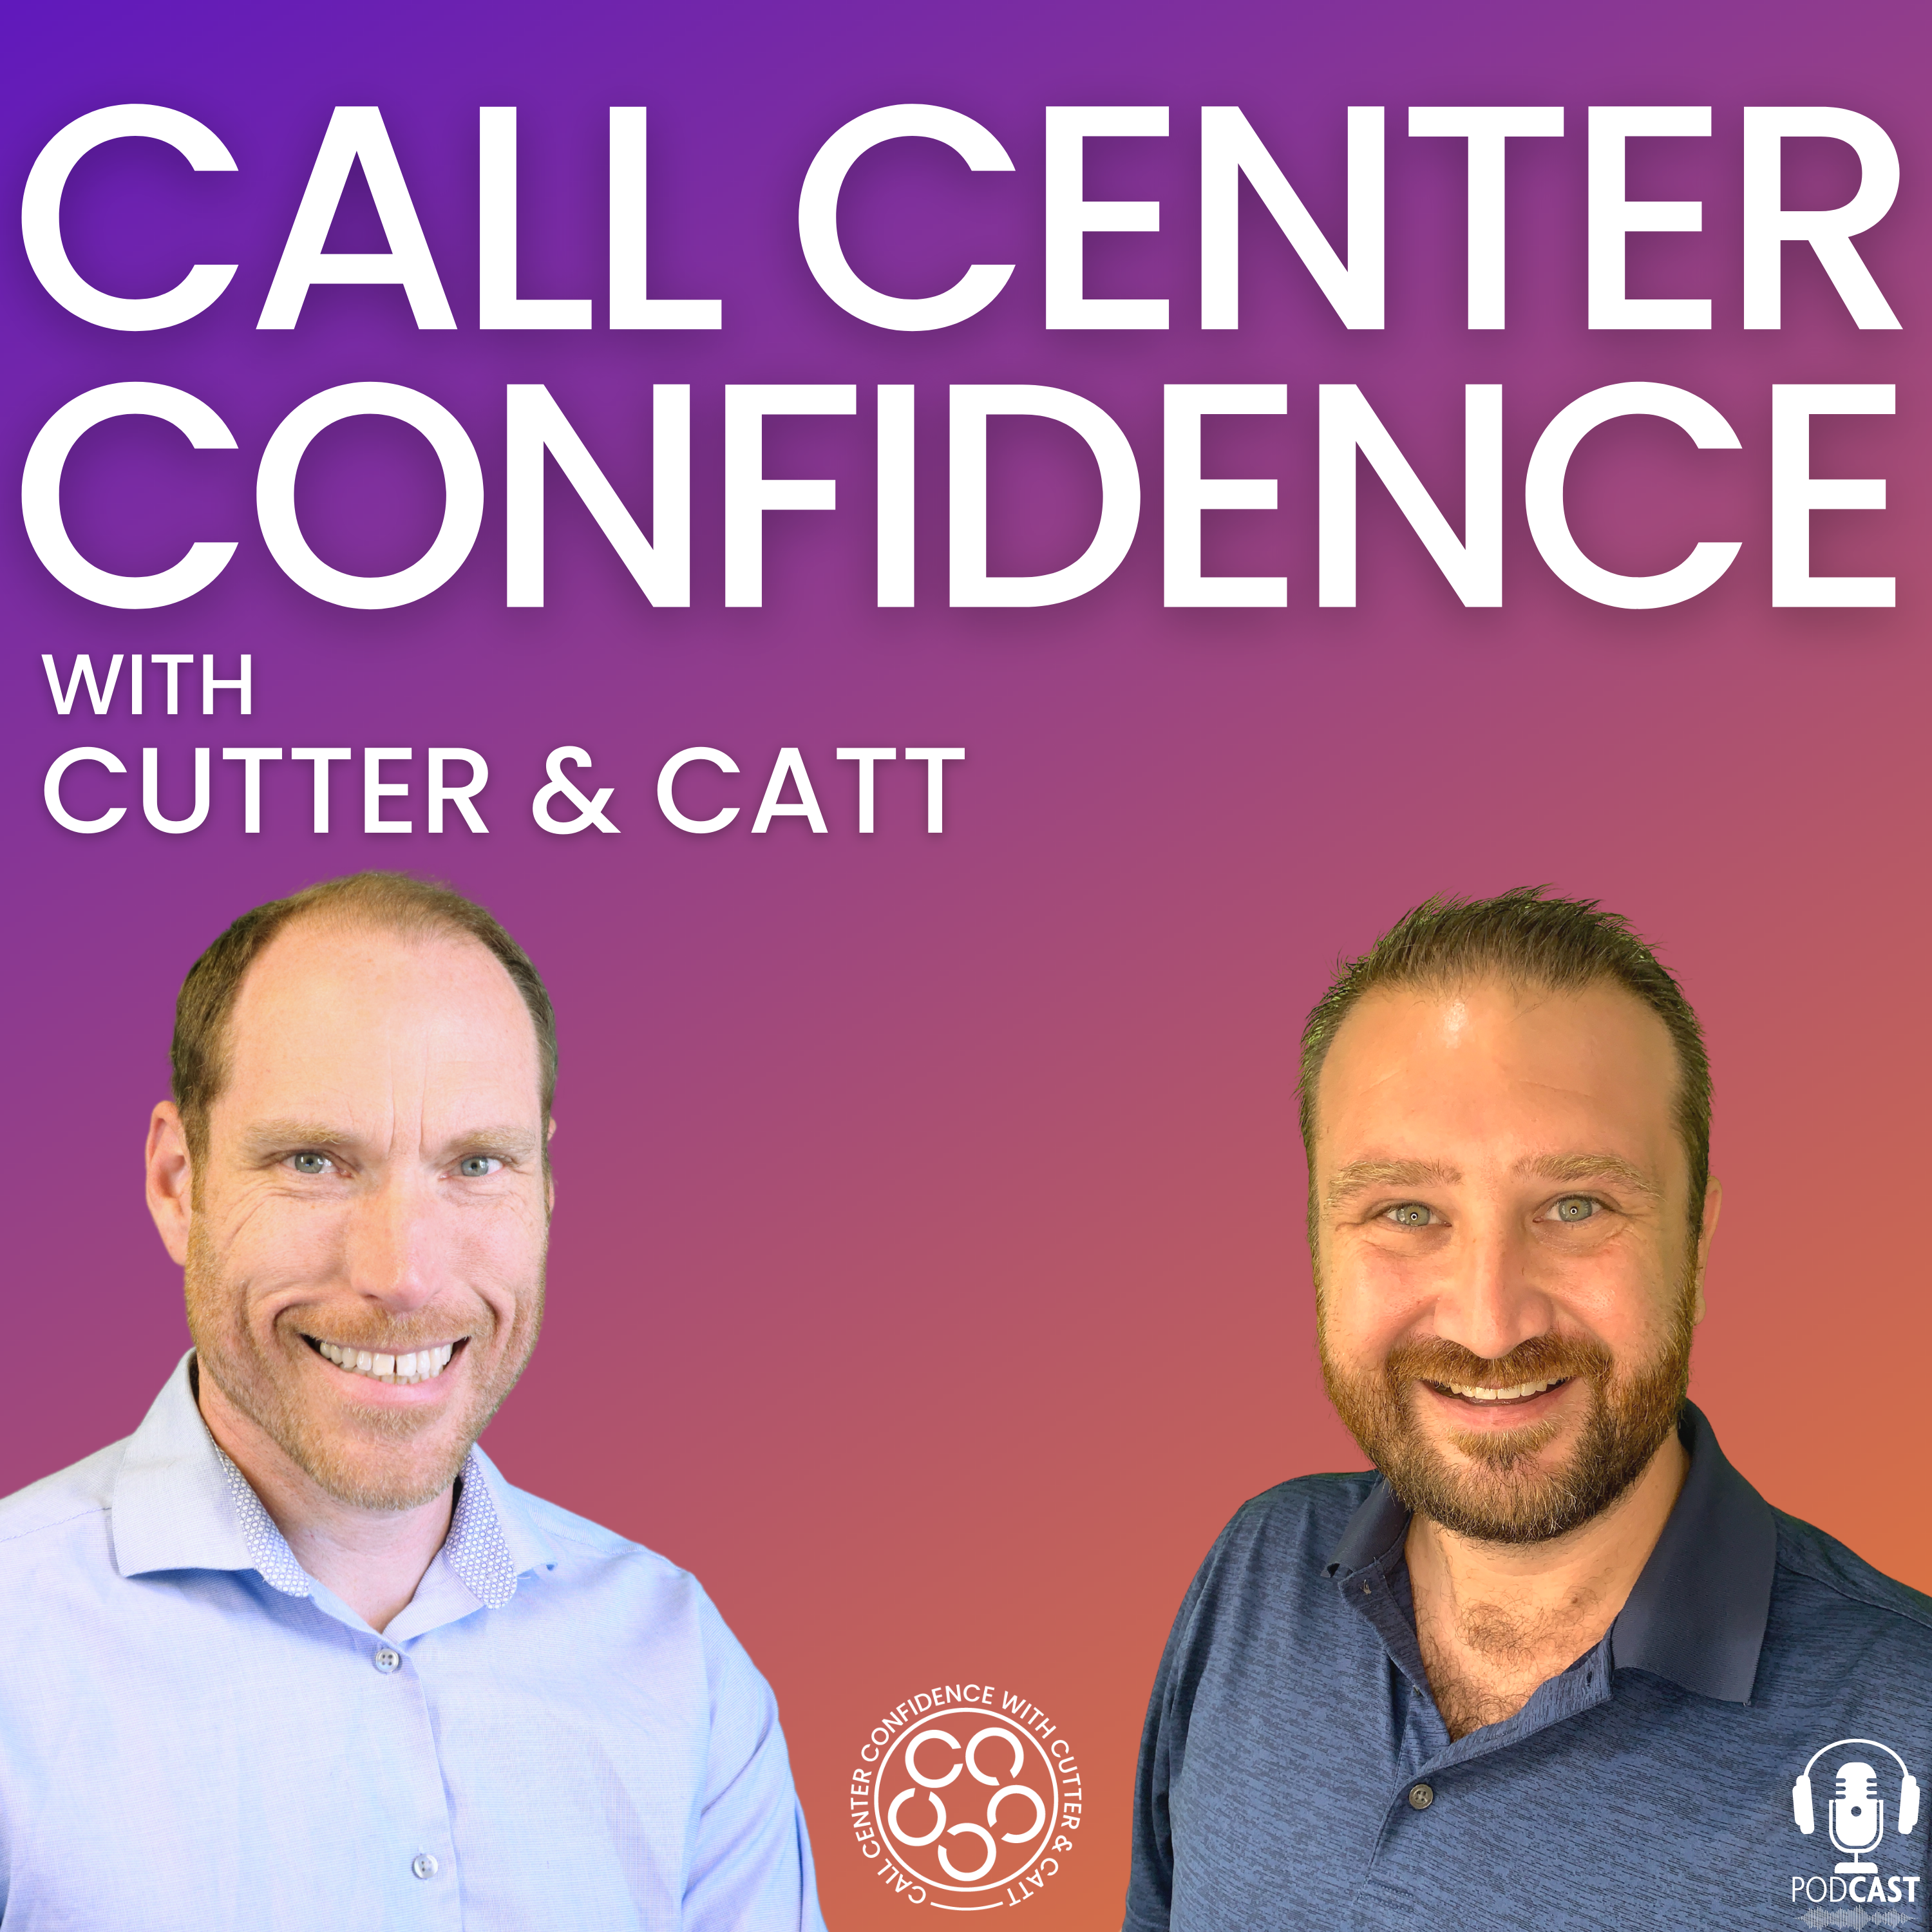 Call Center Confidence with Cutter & Catt